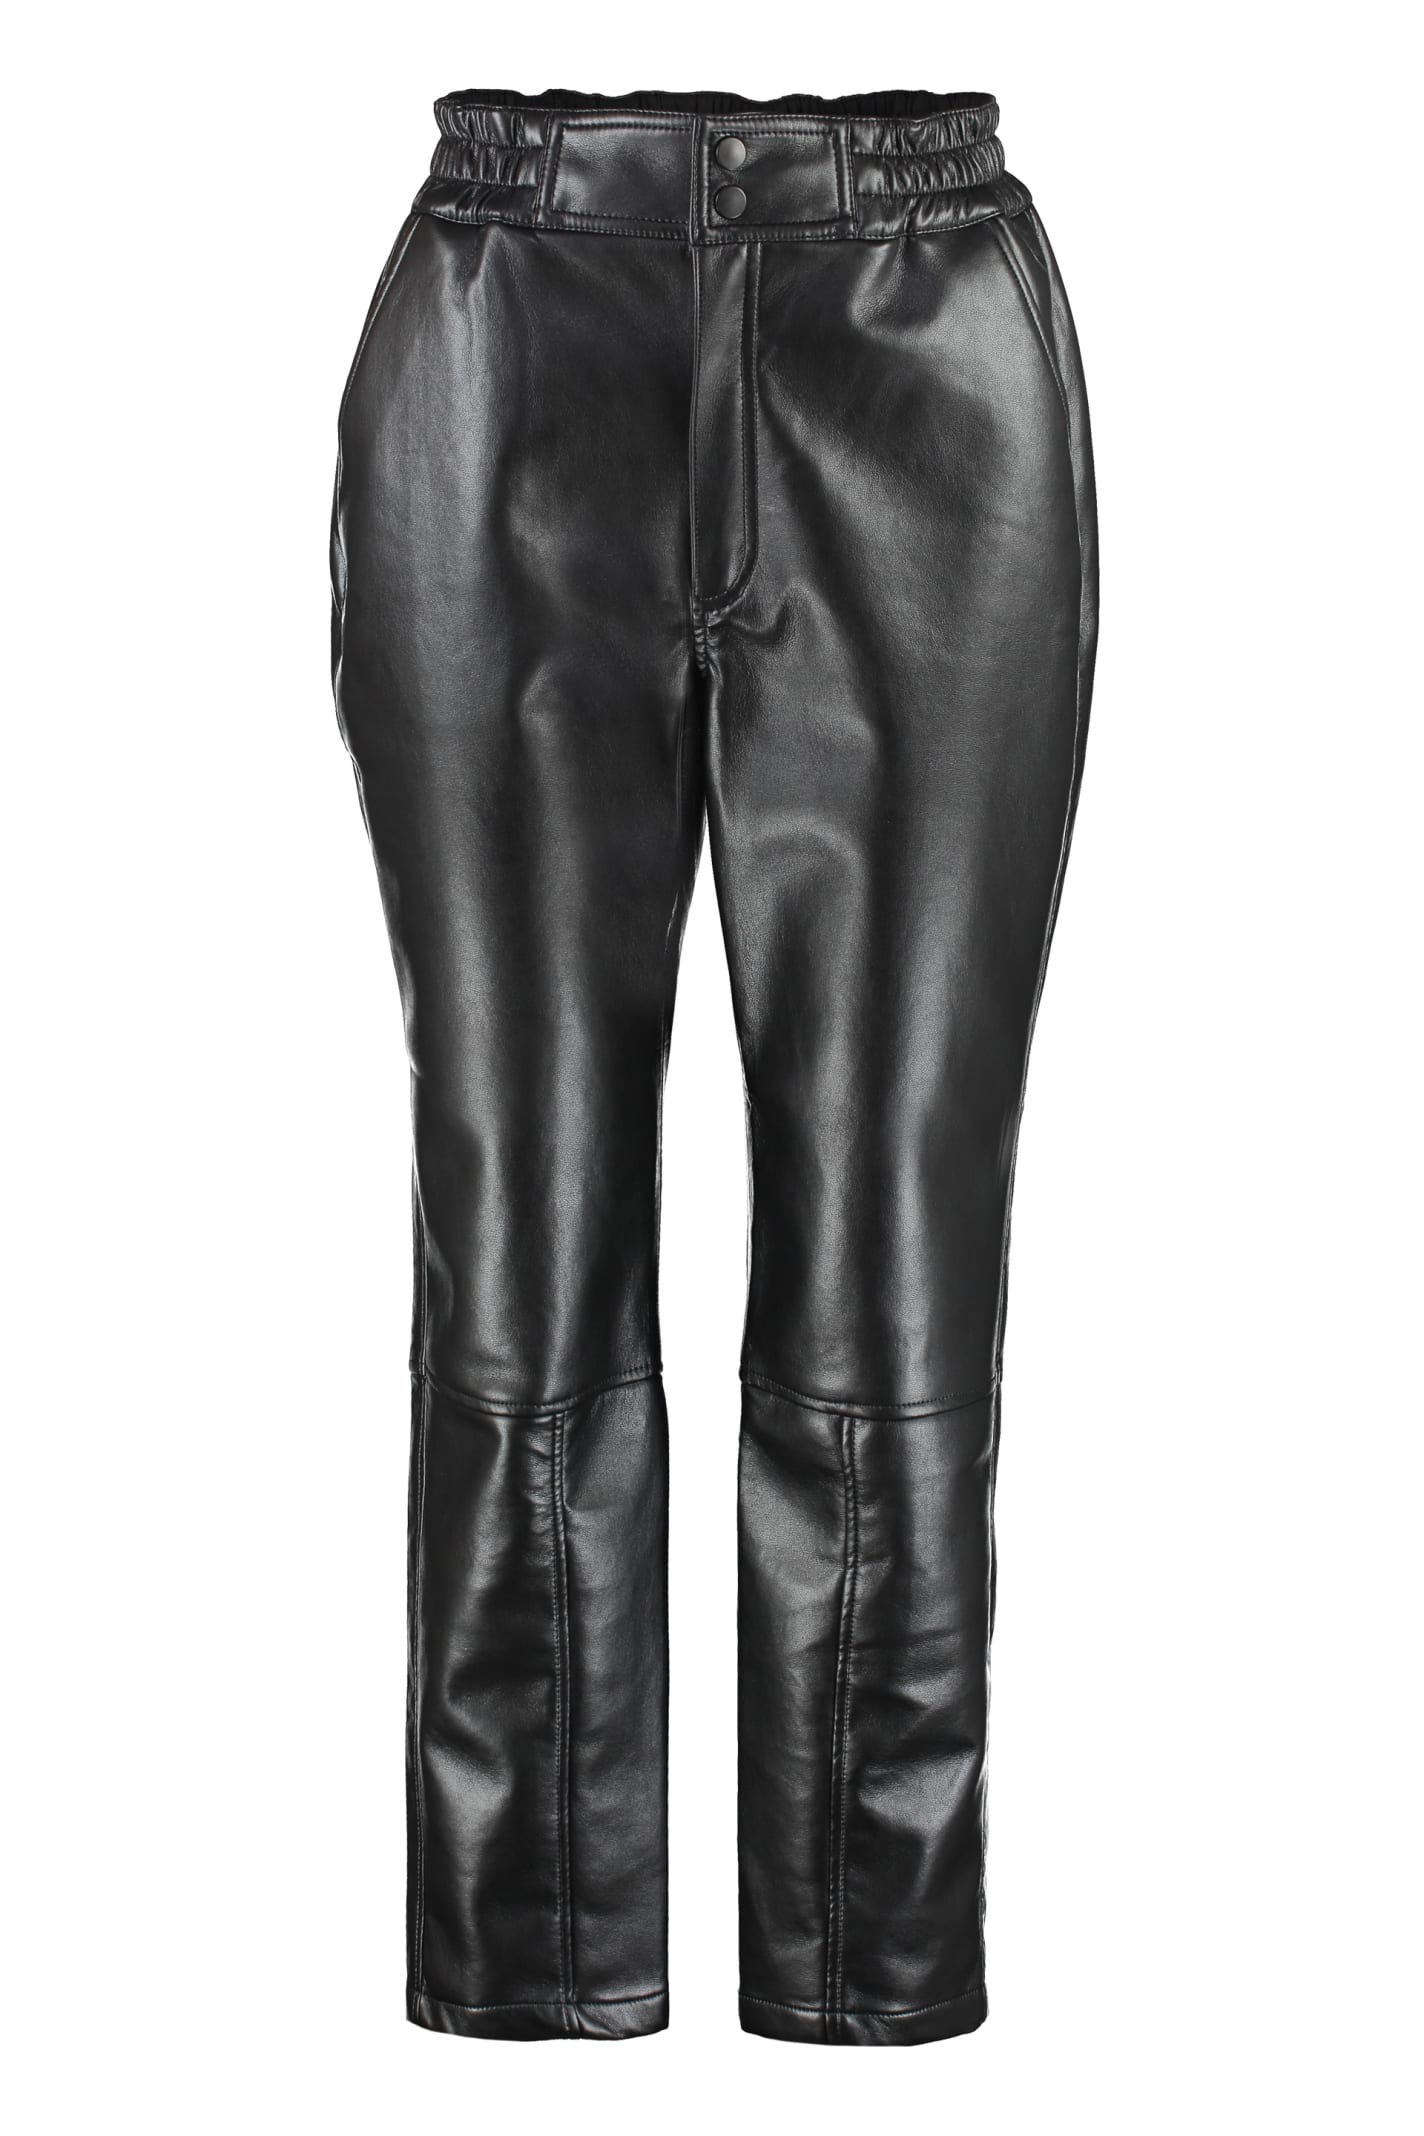 Rodebjer Leather Pants